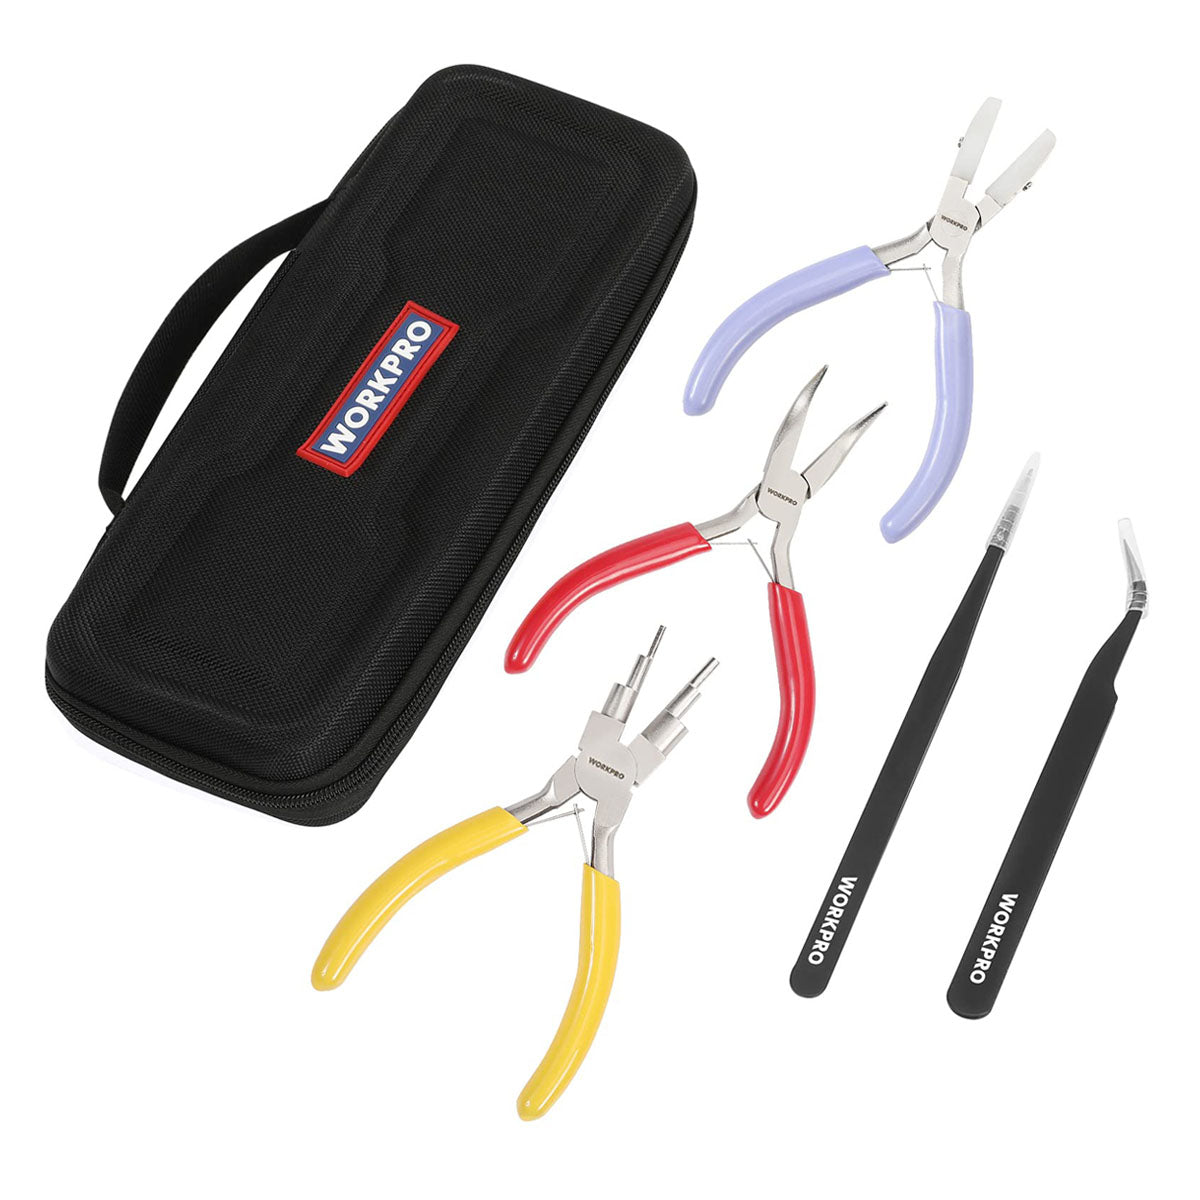 WORKPRO 4-Piece Snap Ring Pliers Set and 3-Piece Small Pliers Tool